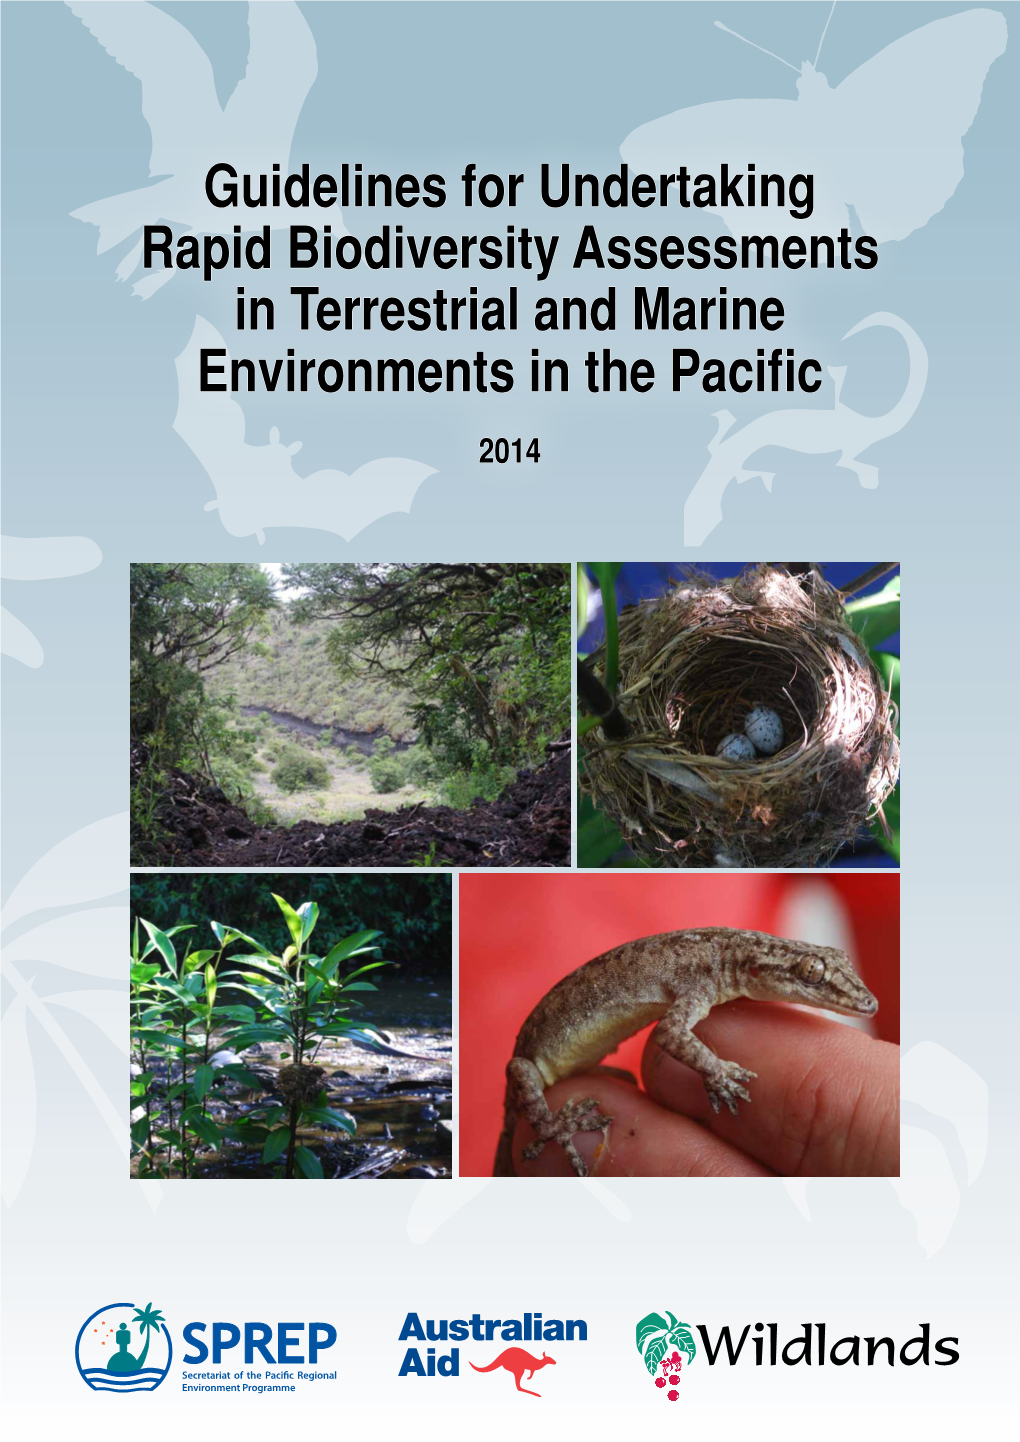 Guidelines for Undertaking Rapid Biodiversity Assessments